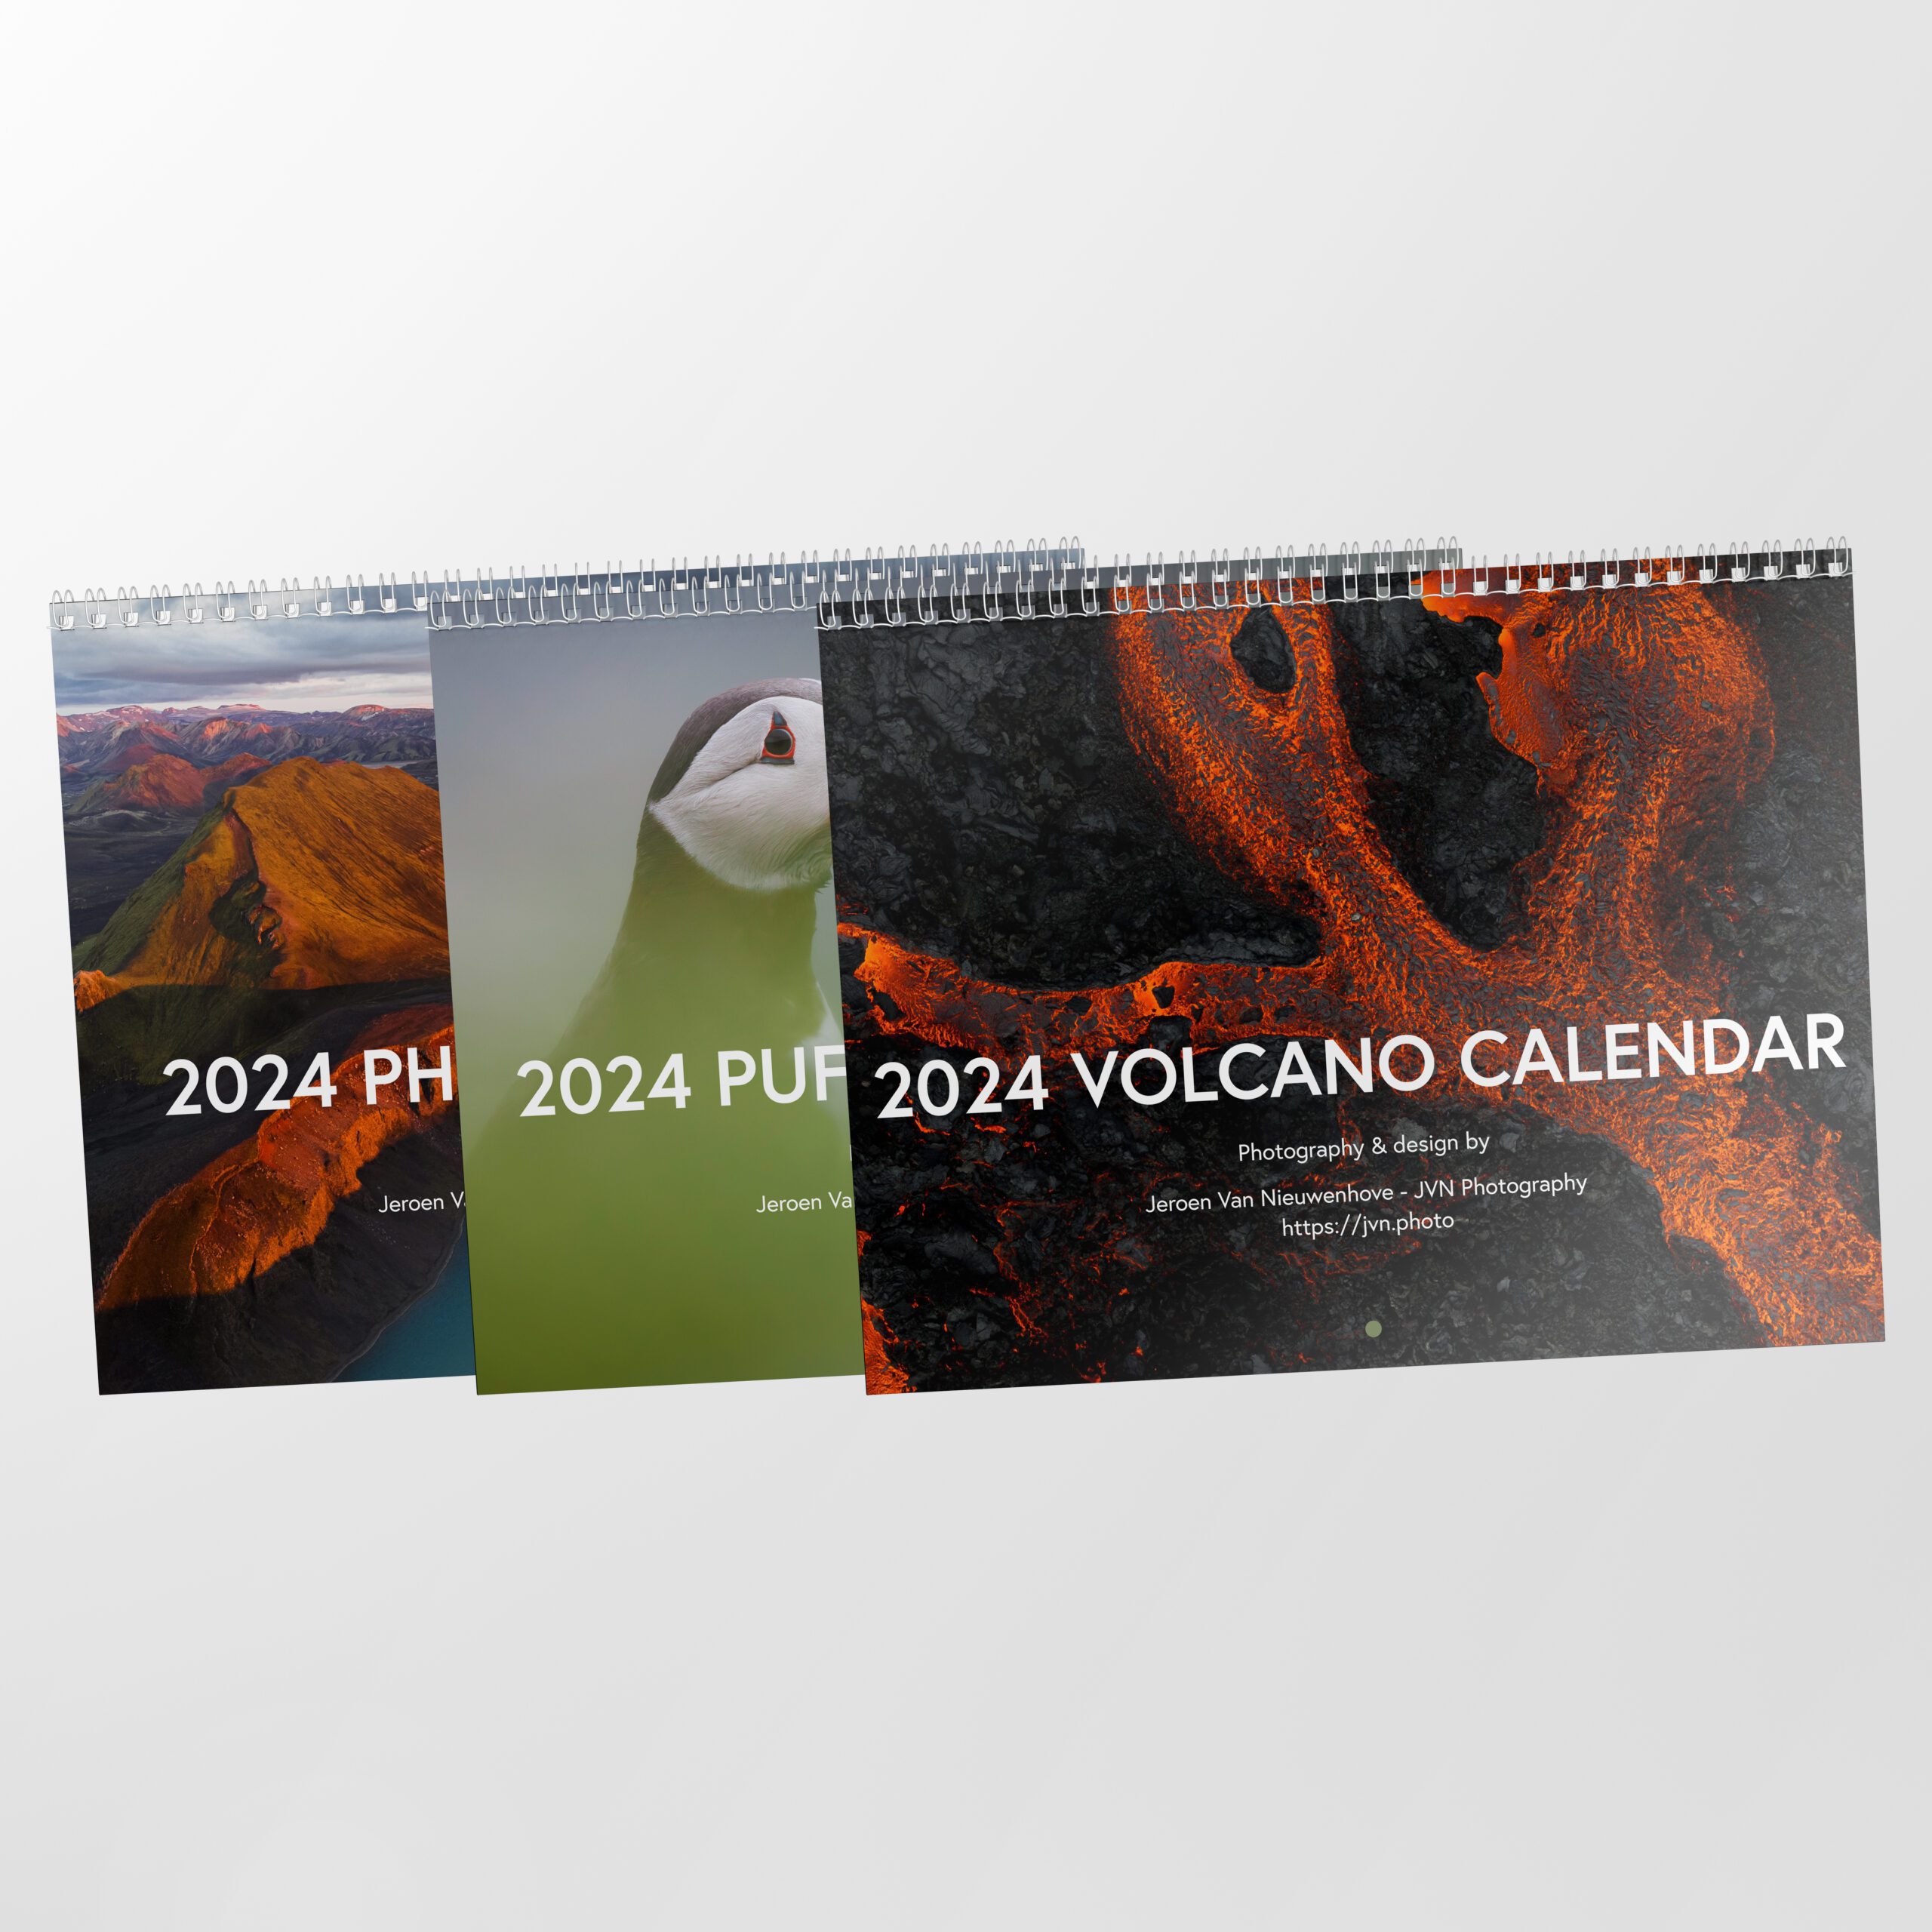 New – 2024 Photo Calendars Are Available!